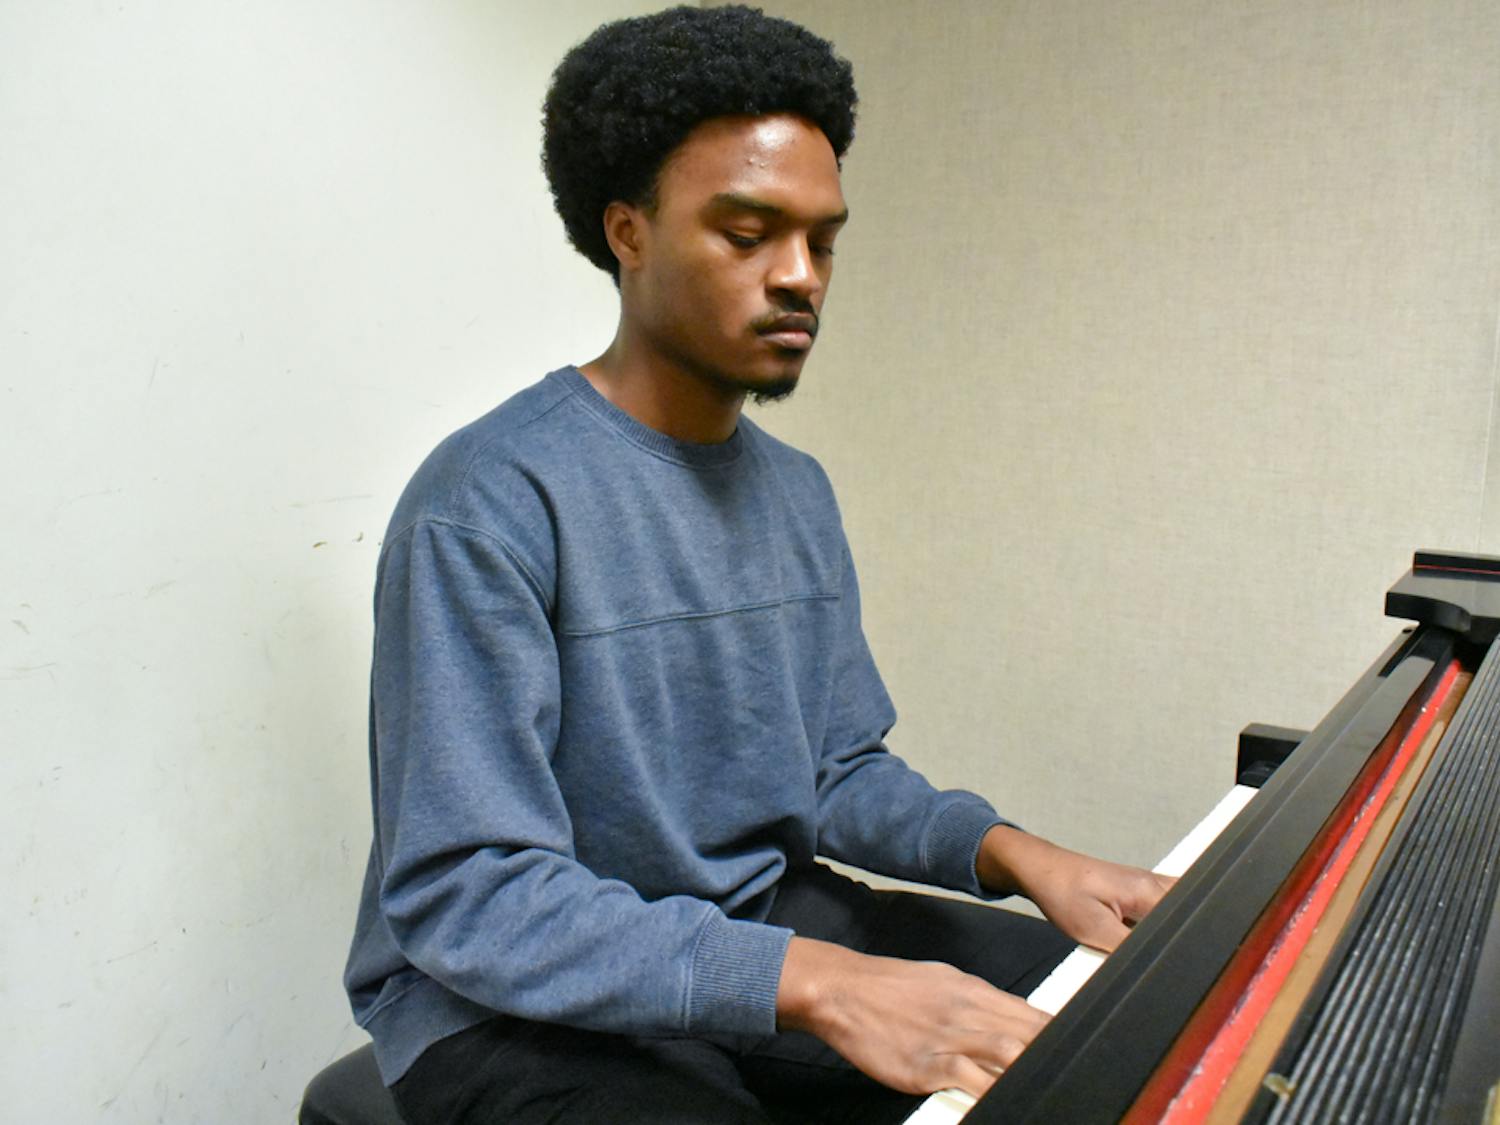 Medley practices playing the piano before the ensemble’s rehearsal on Feb. 7, 2023. Medley said he believes that music helps to “really emphasize the emotion that you’re feeling and to be able to process it in that moment.”